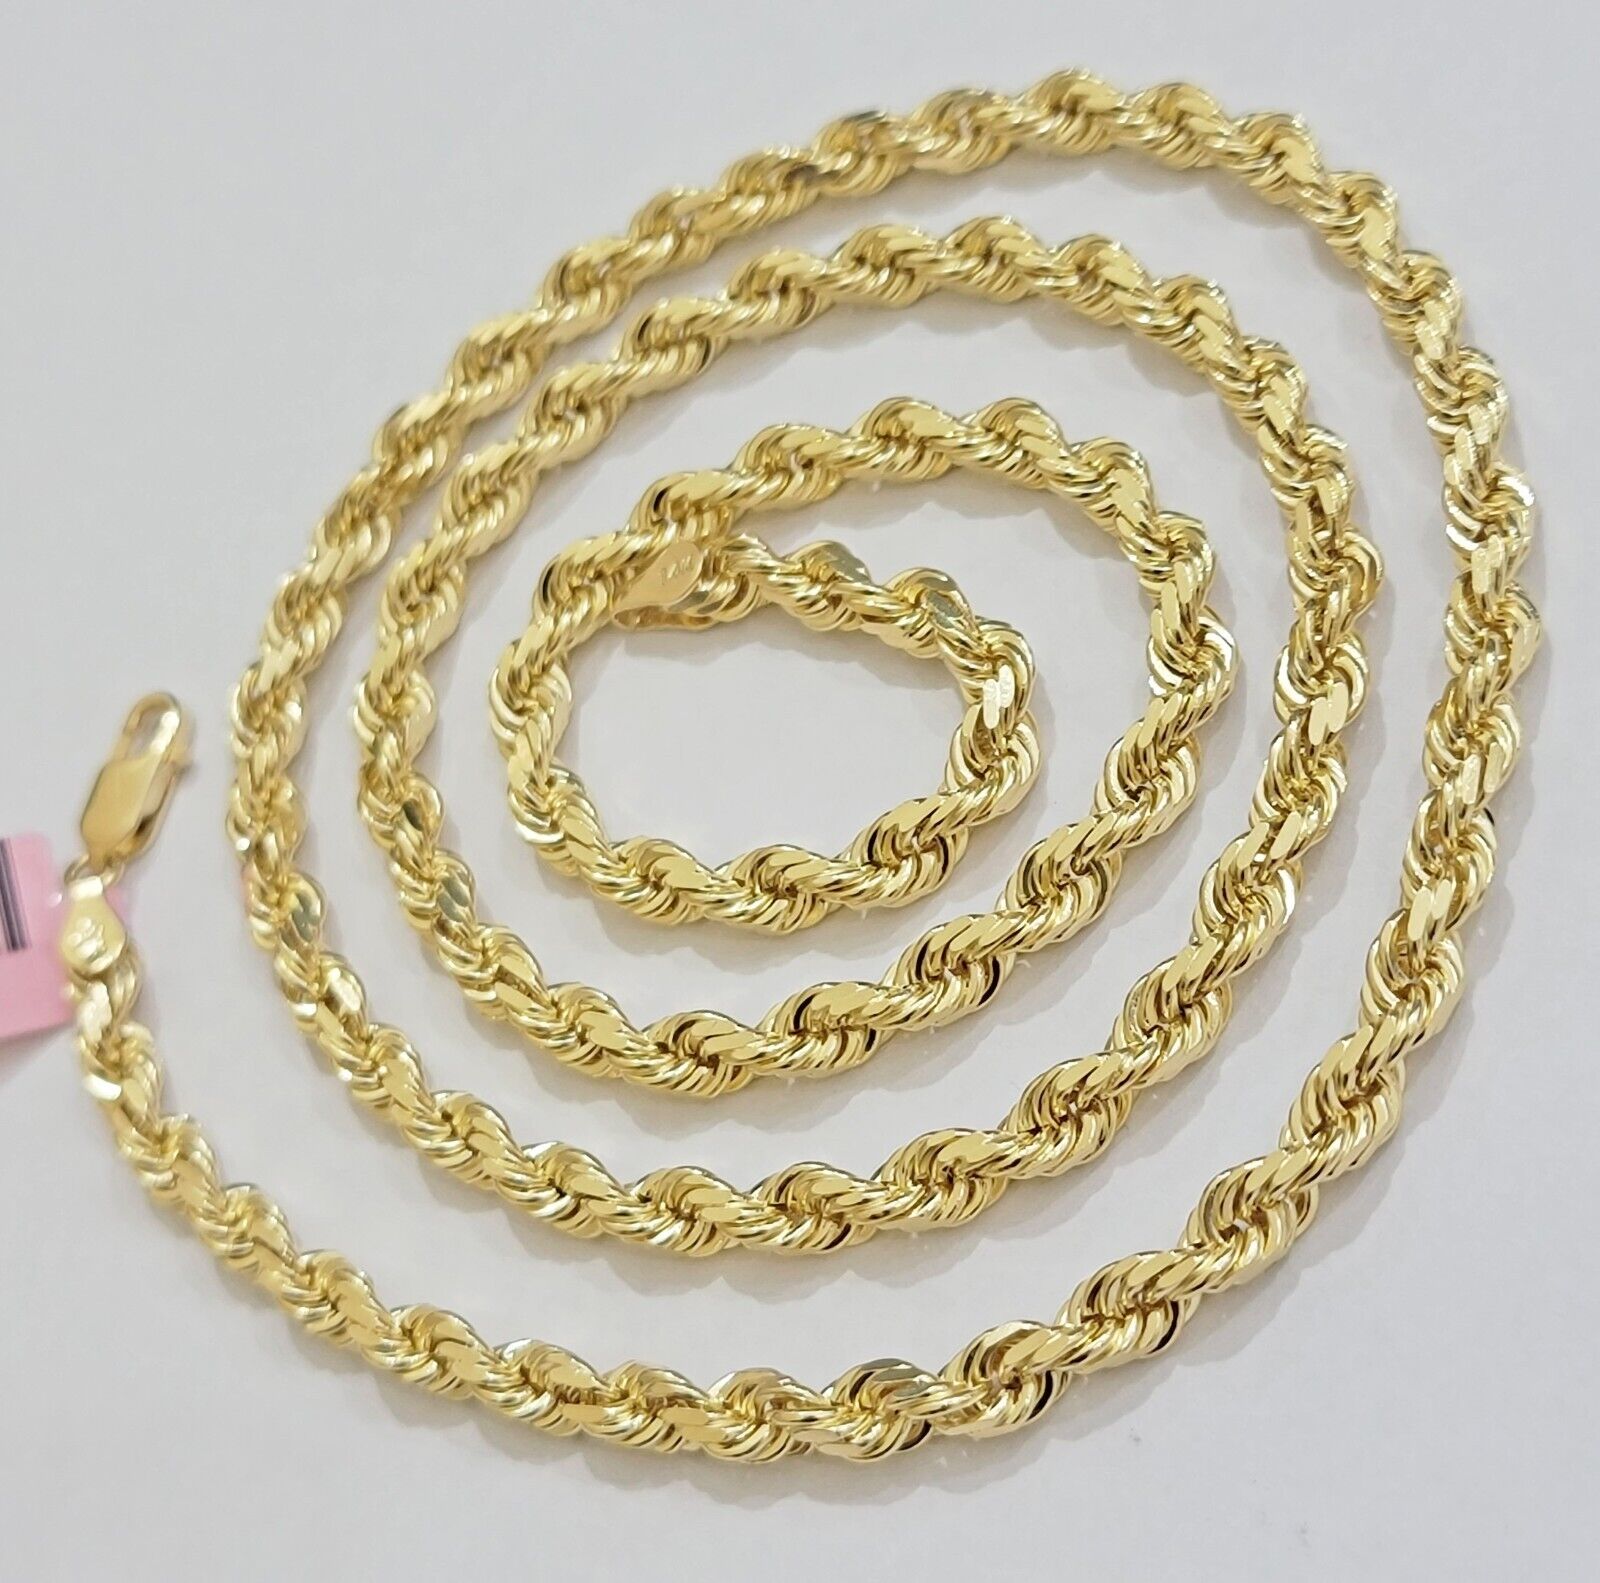 Real 14k Yellow Gold Rope Chain 28 Inch Necklace 4.5mm Diamond Cut SOLID 14K Men